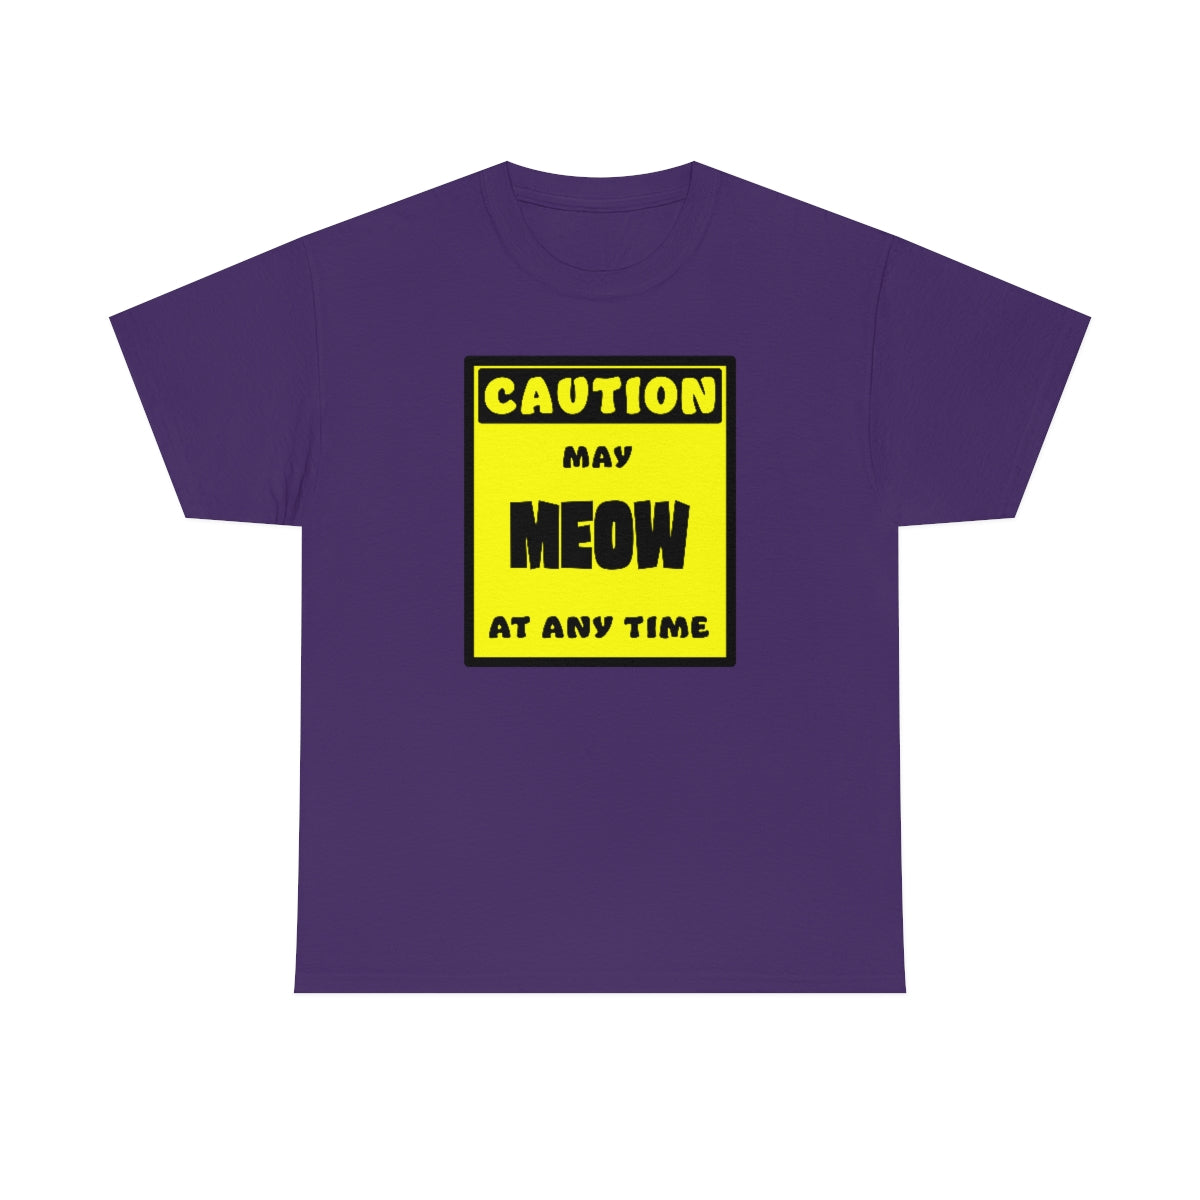 CAUTION! May MEOW at any time! - T-Shirt T-Shirt AFLT-Whootorca Purple S 